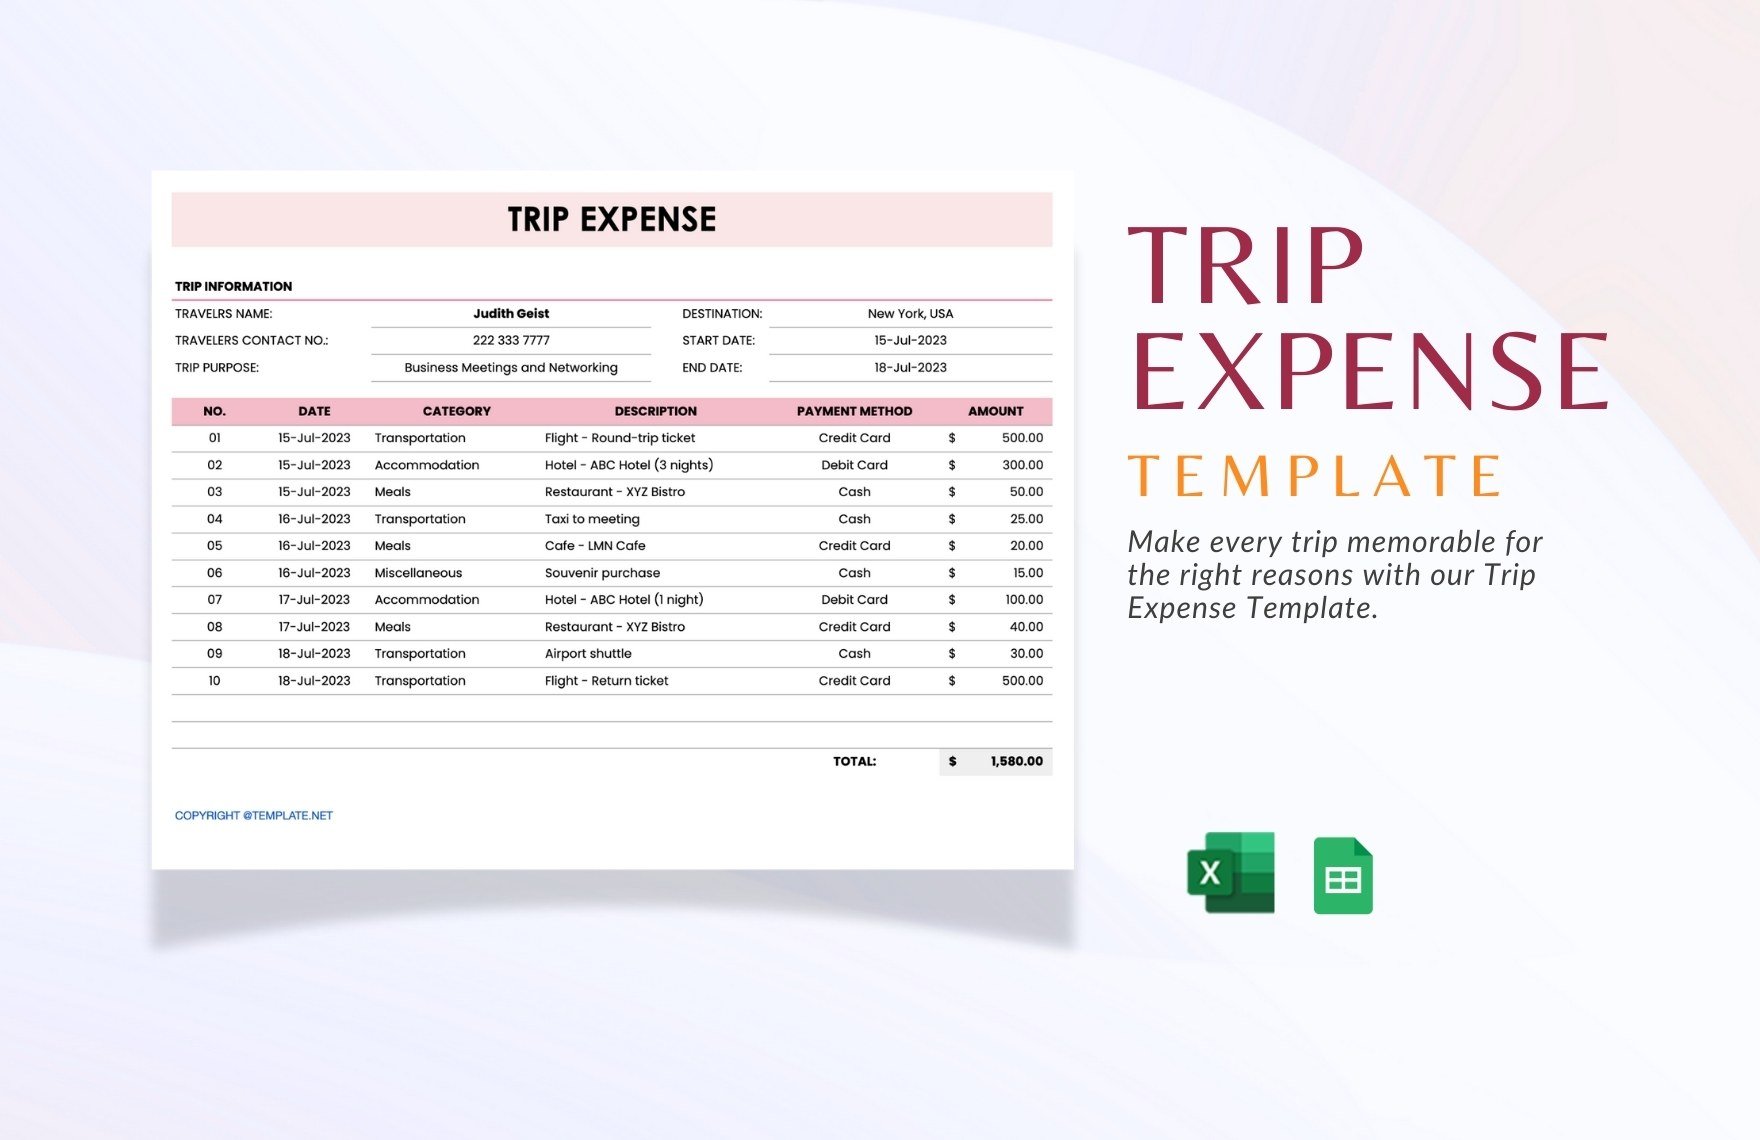 Free Trip Expense Template in Excel, Google Sheets